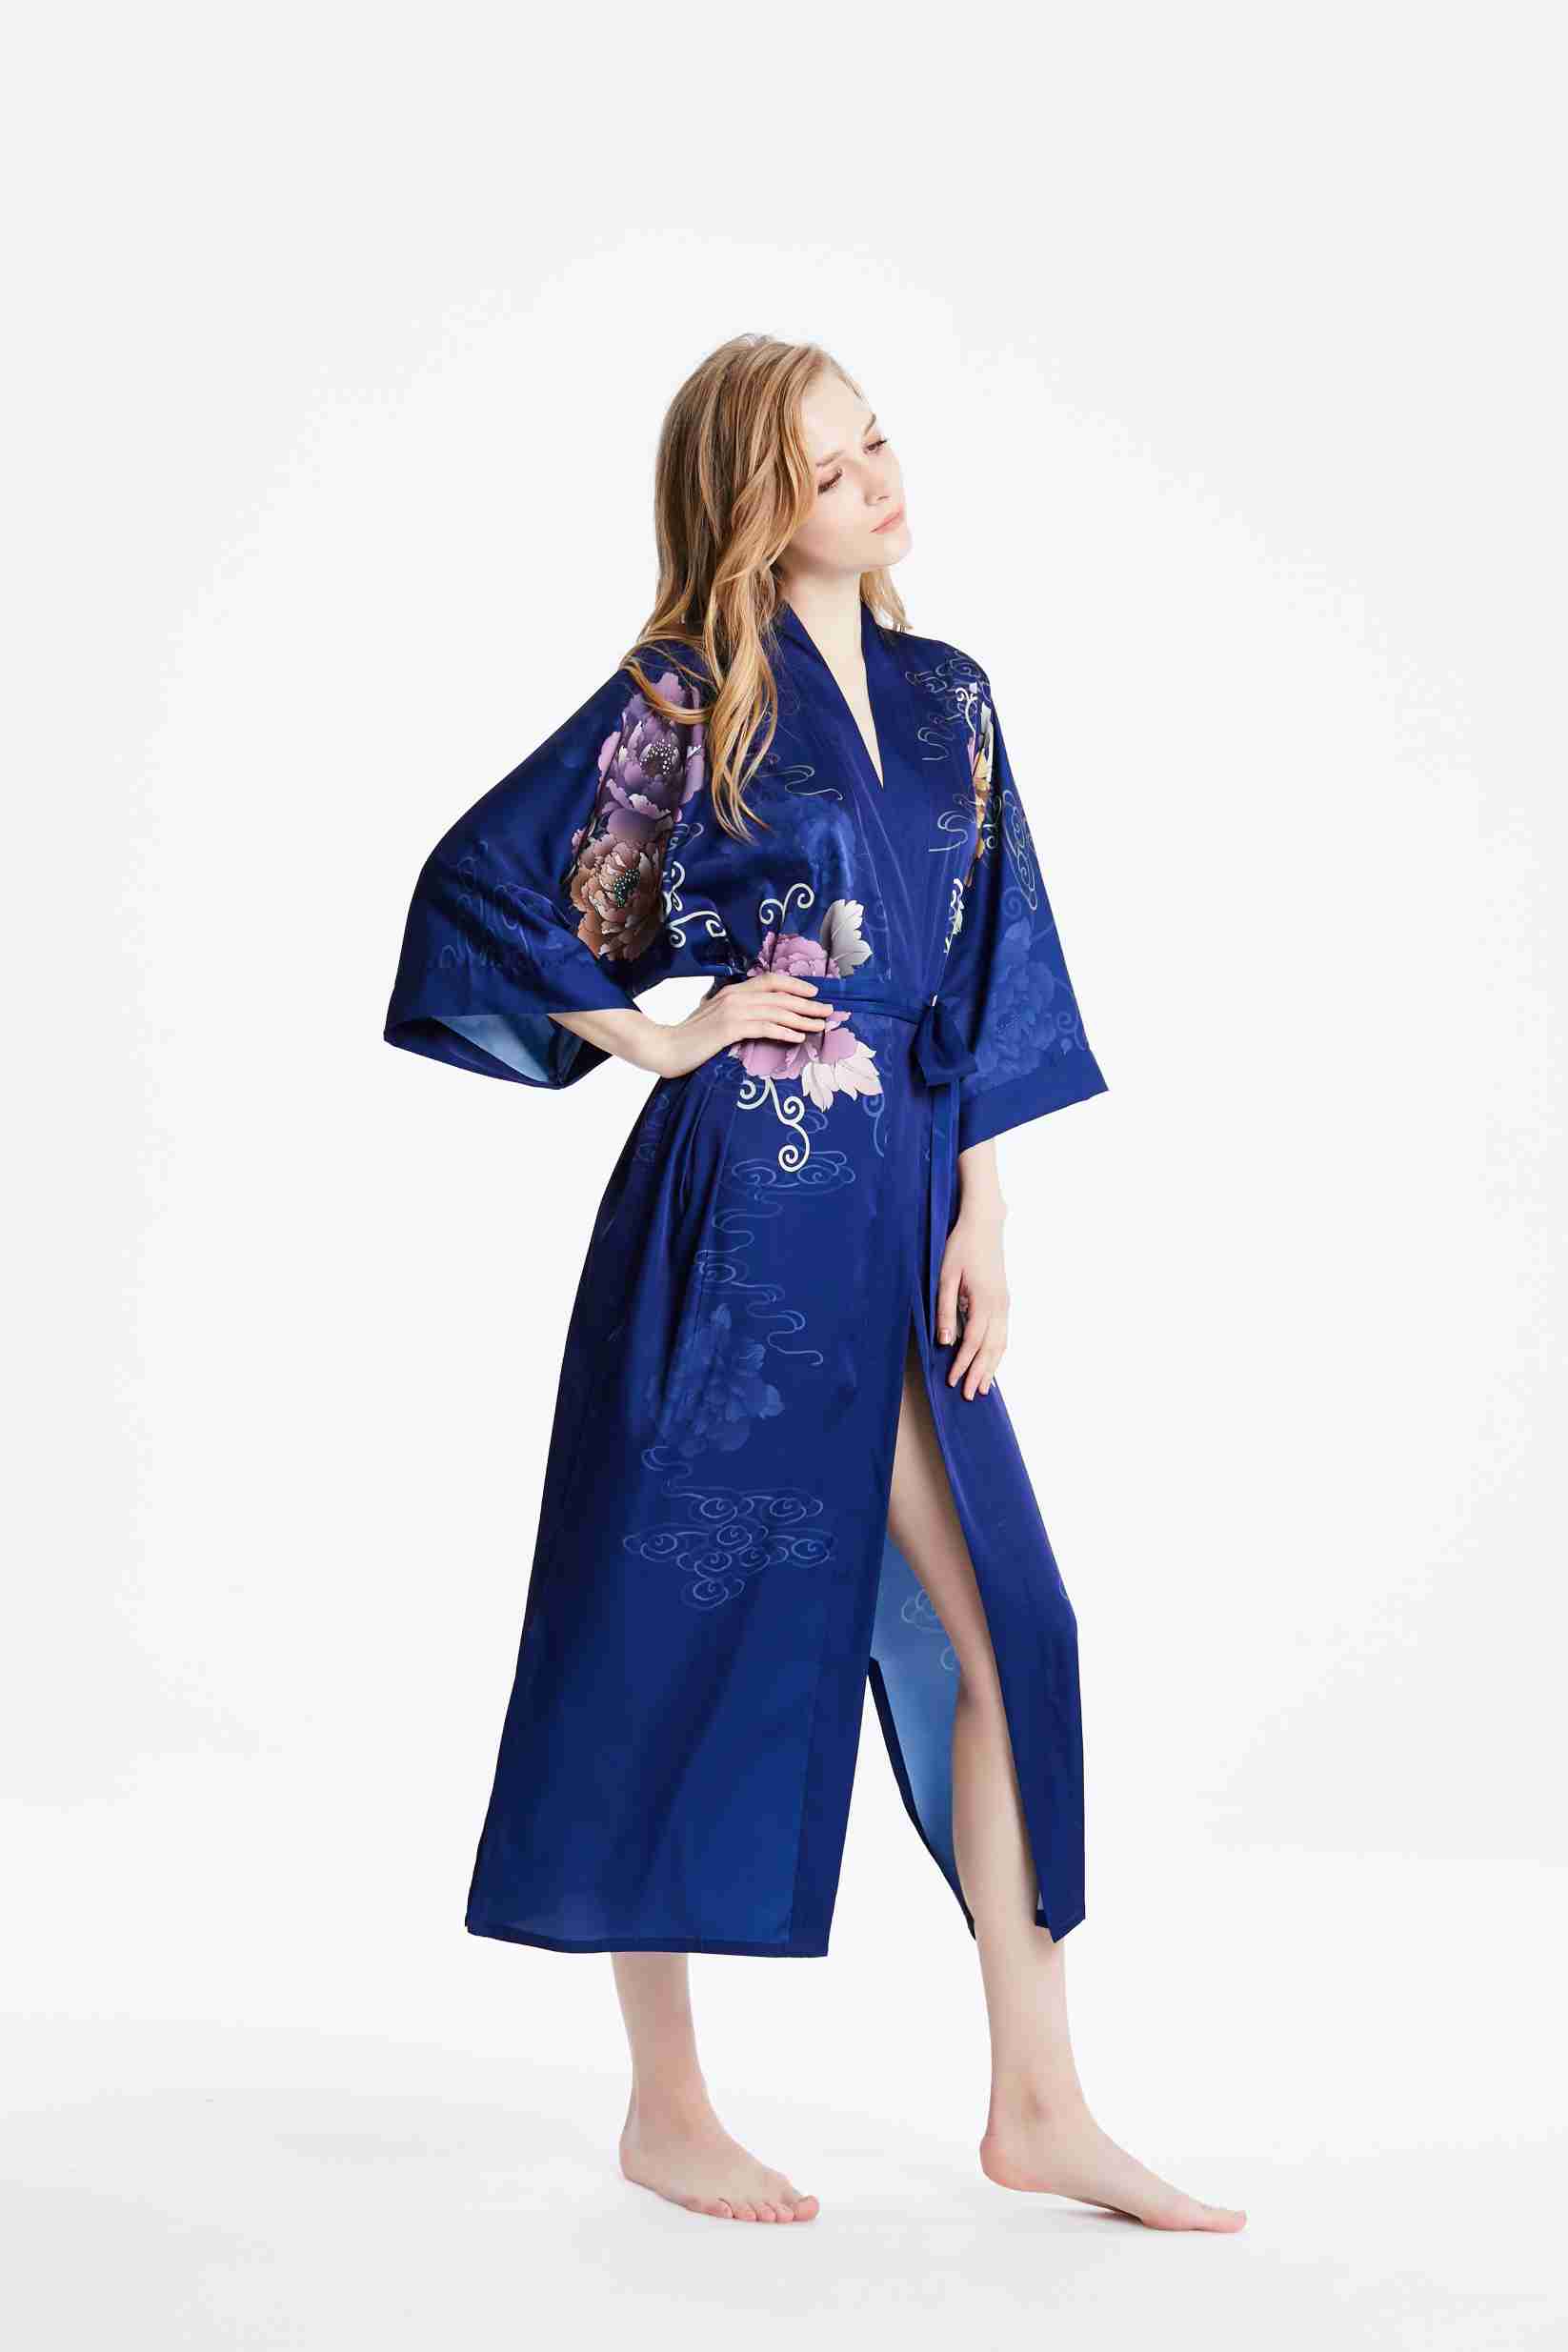 Best Ladies Full night Authentic Silk Blue Kimono Robe gown with Custom Floral Print Factory Wholesale